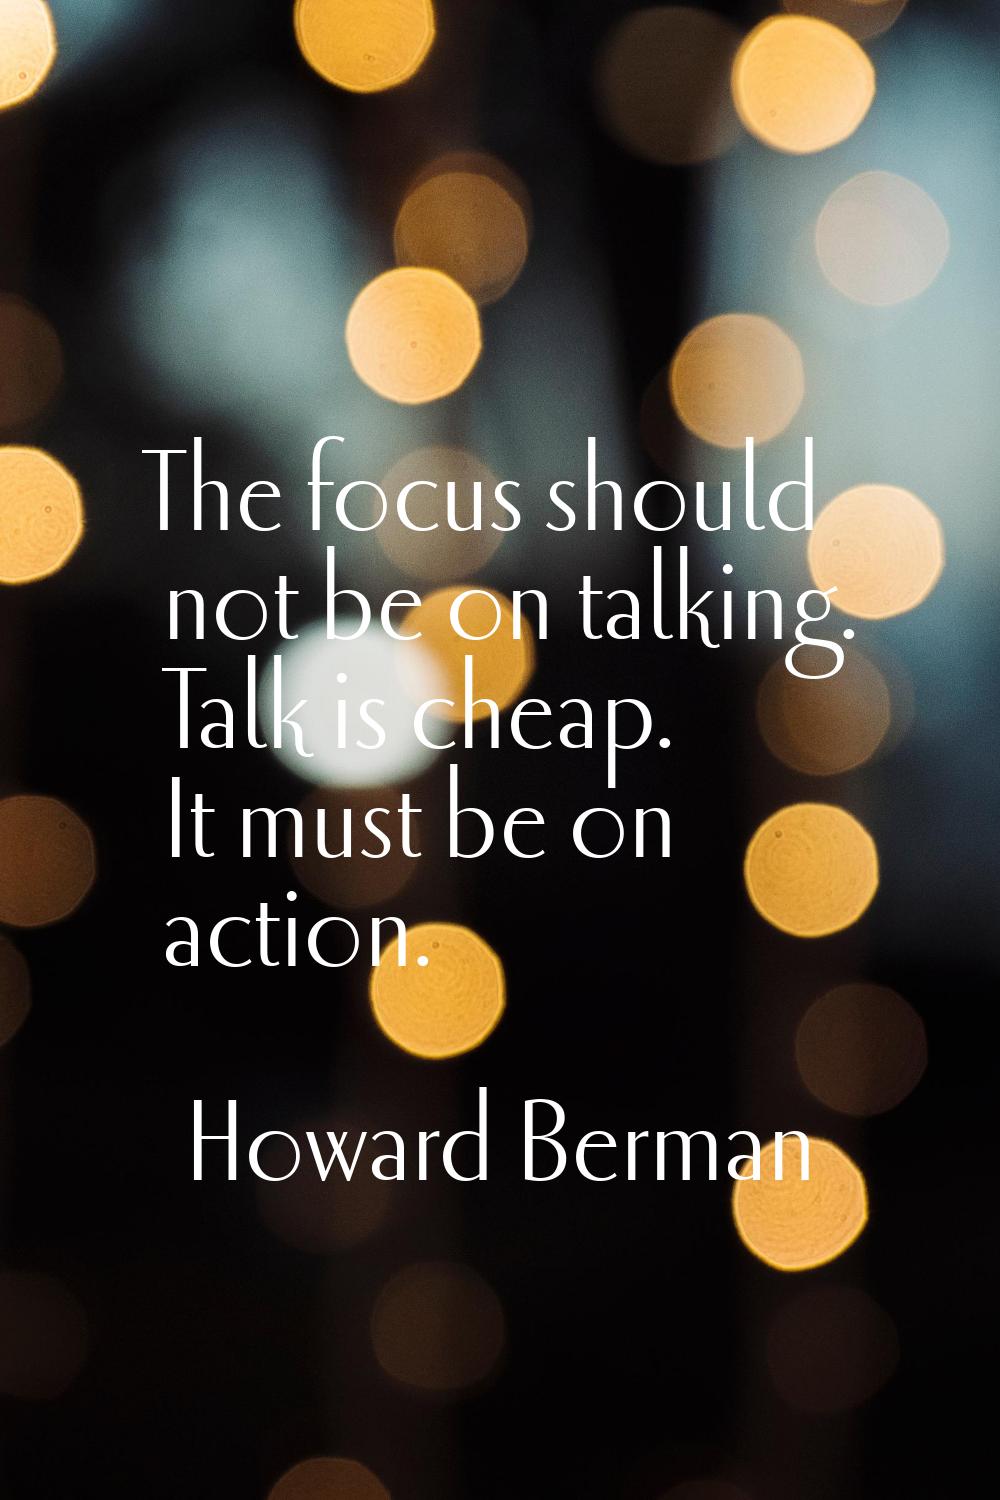 The focus should not be on talking. Talk is cheap. It must be on action.